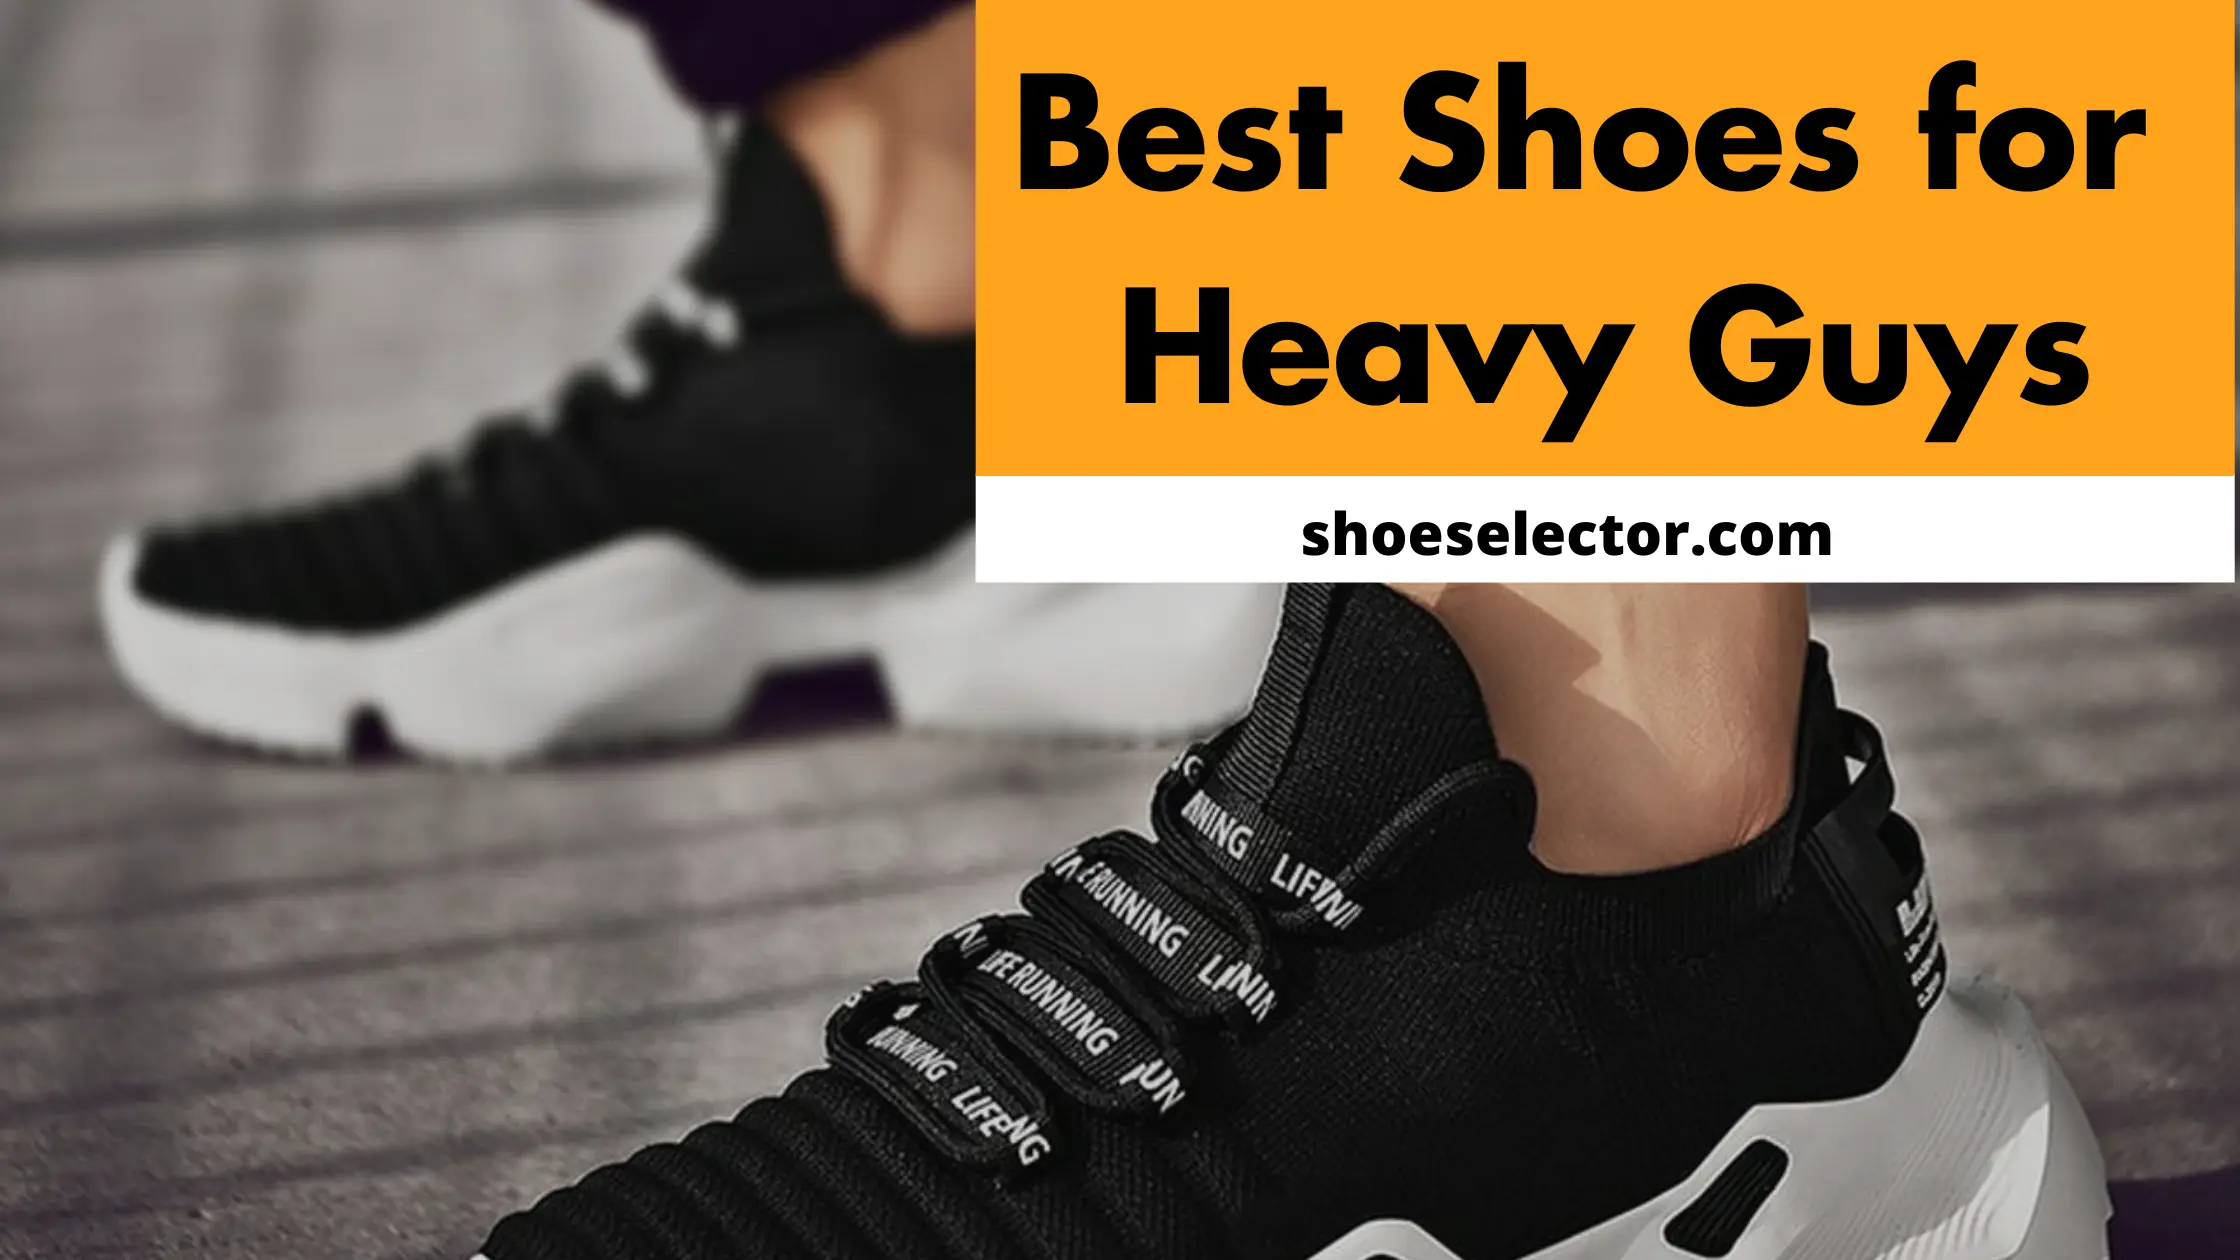 Best Shoes For Heavy Guys - Recommended by Experts